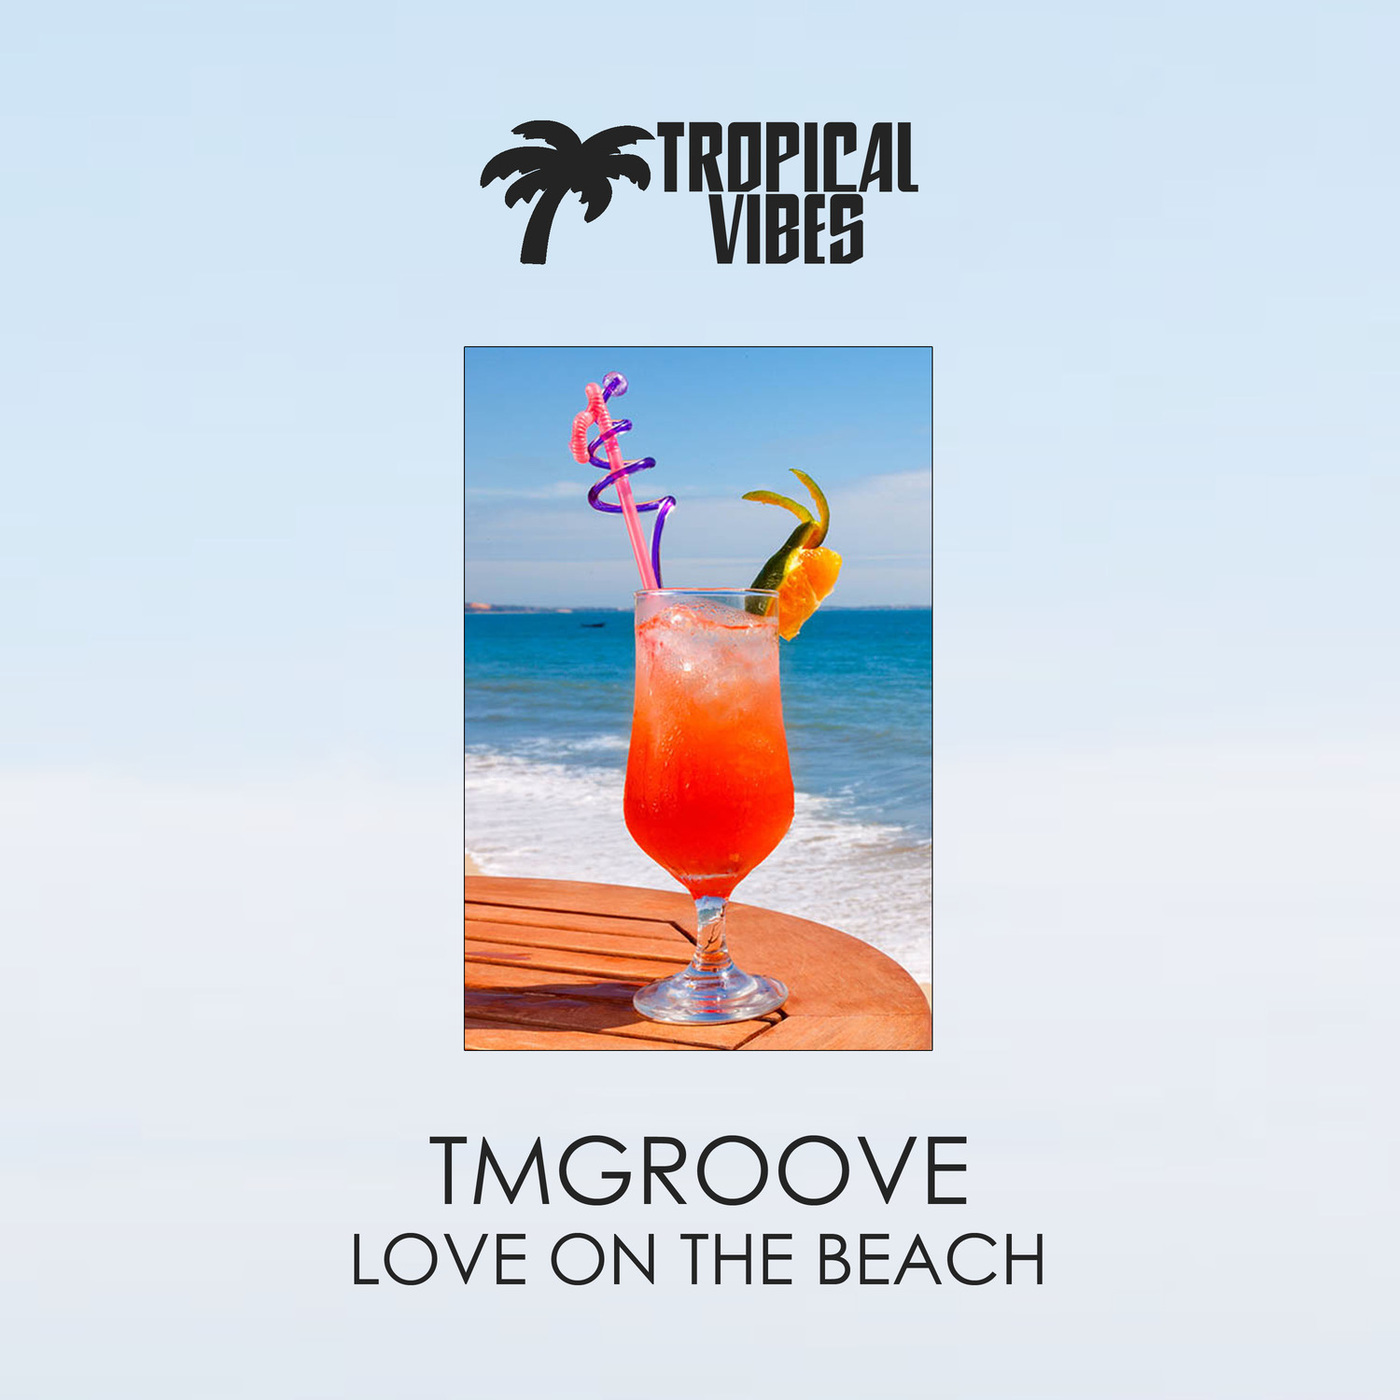 TMGROOVE - Love On The Beach / Tropical Vibes